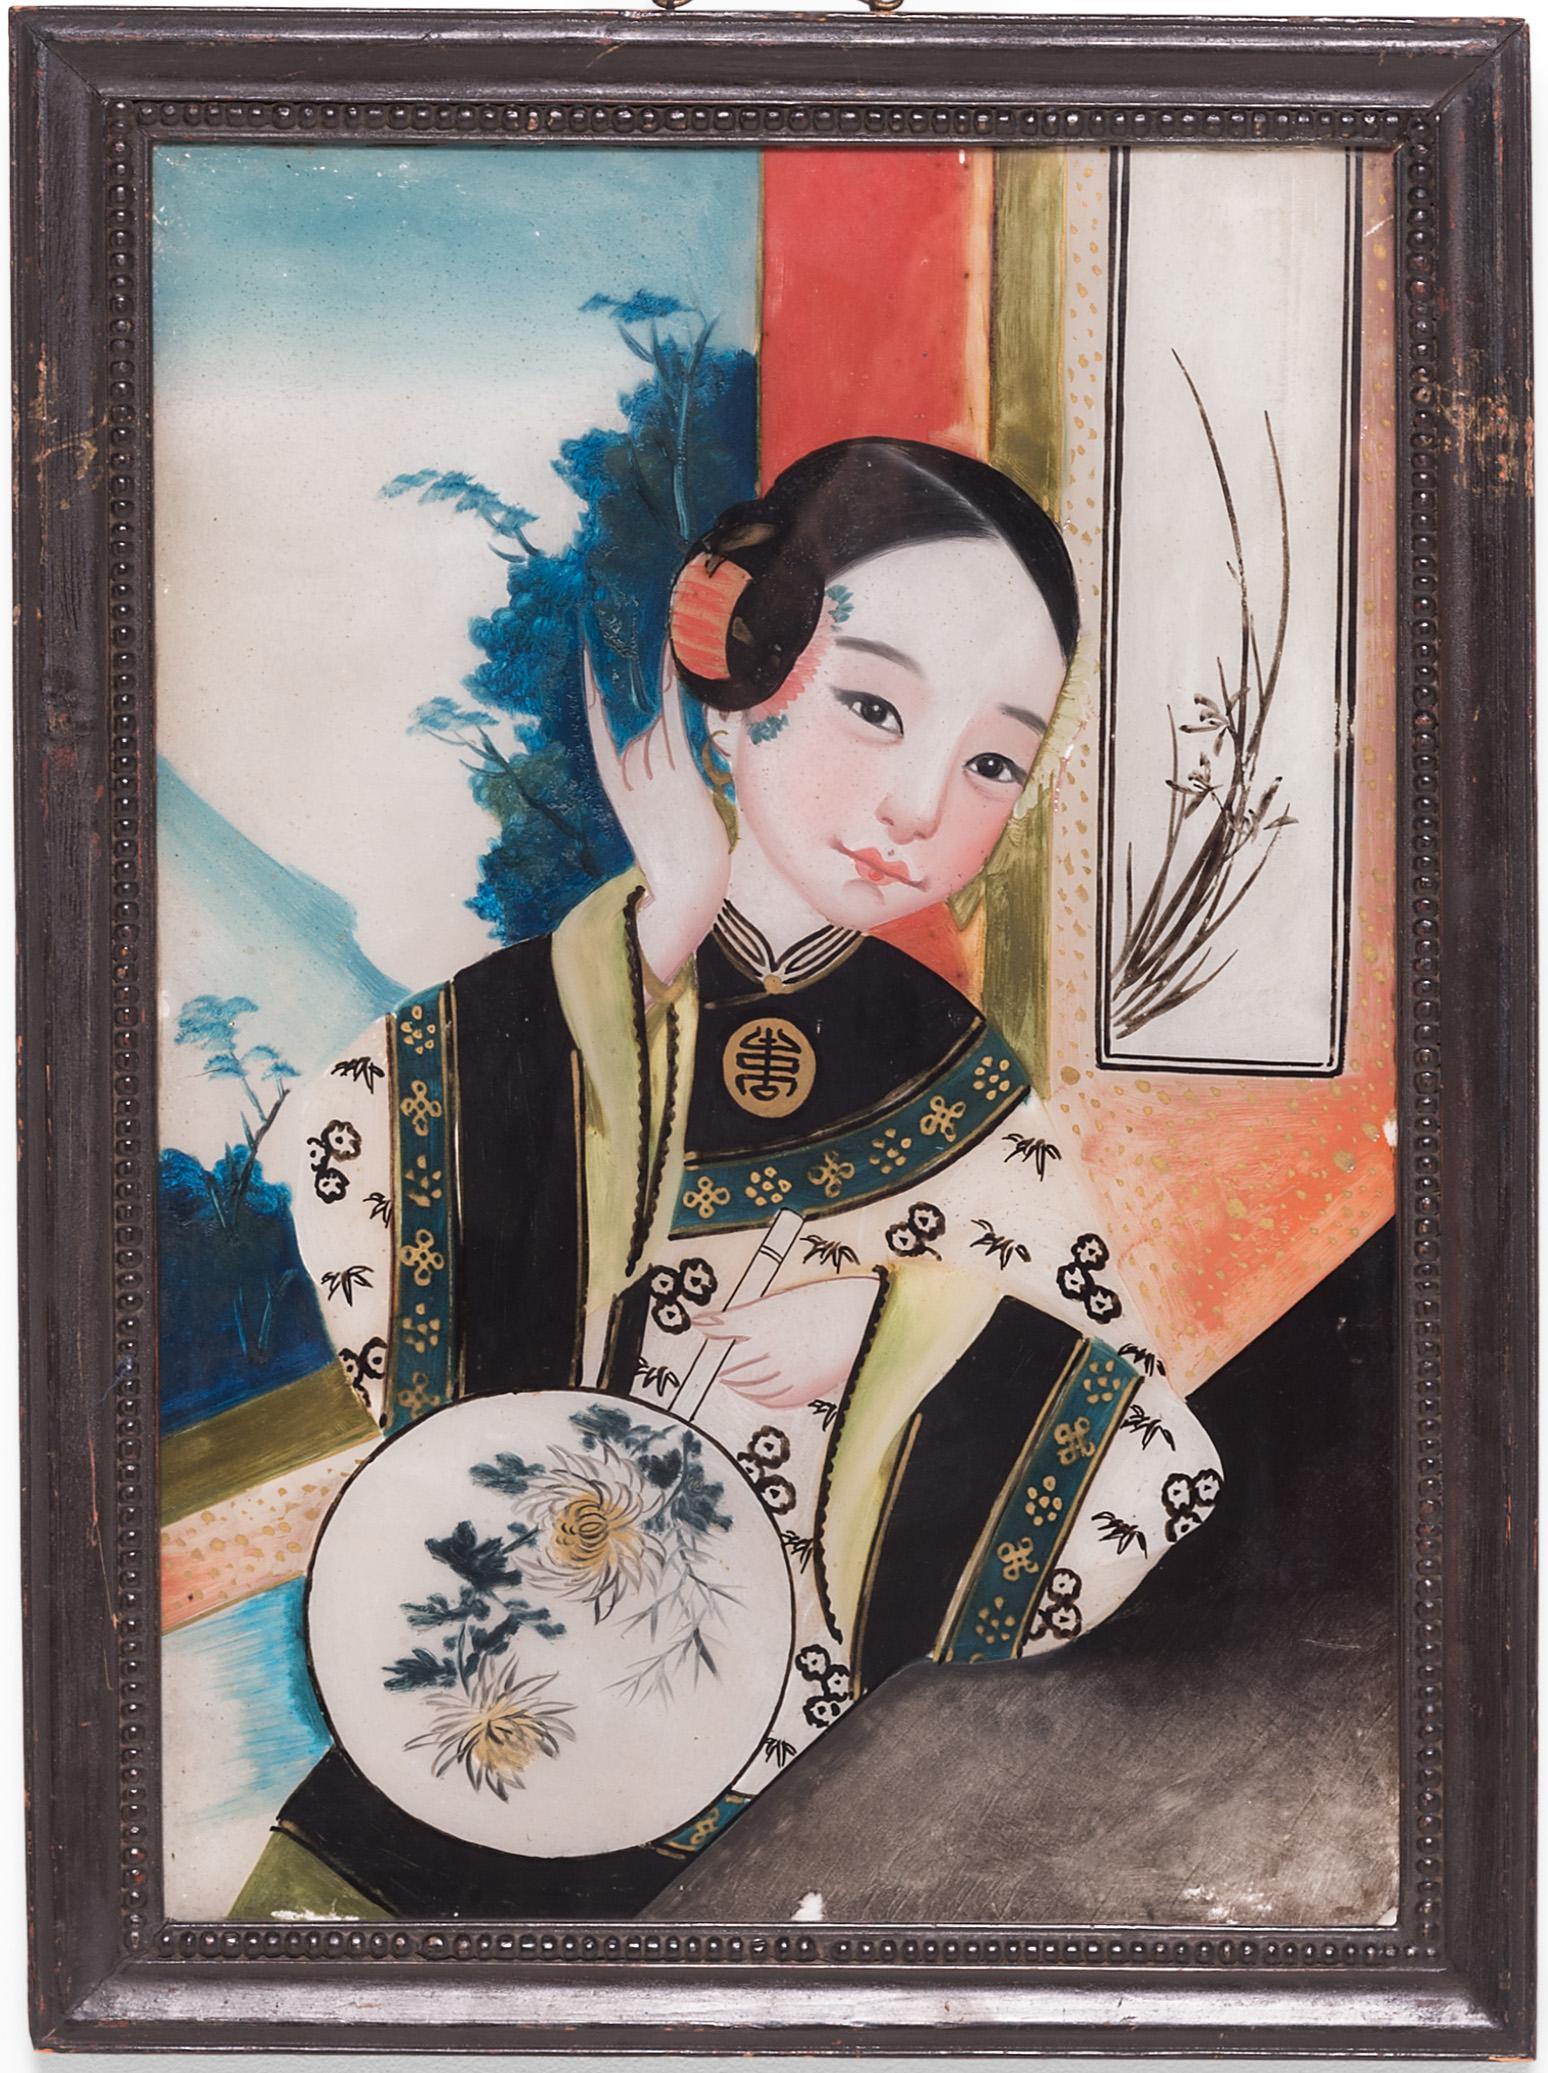 Unknown Portrait Painting - Chinese Reverse Glass Portrait of a Young Woman, c. 1900